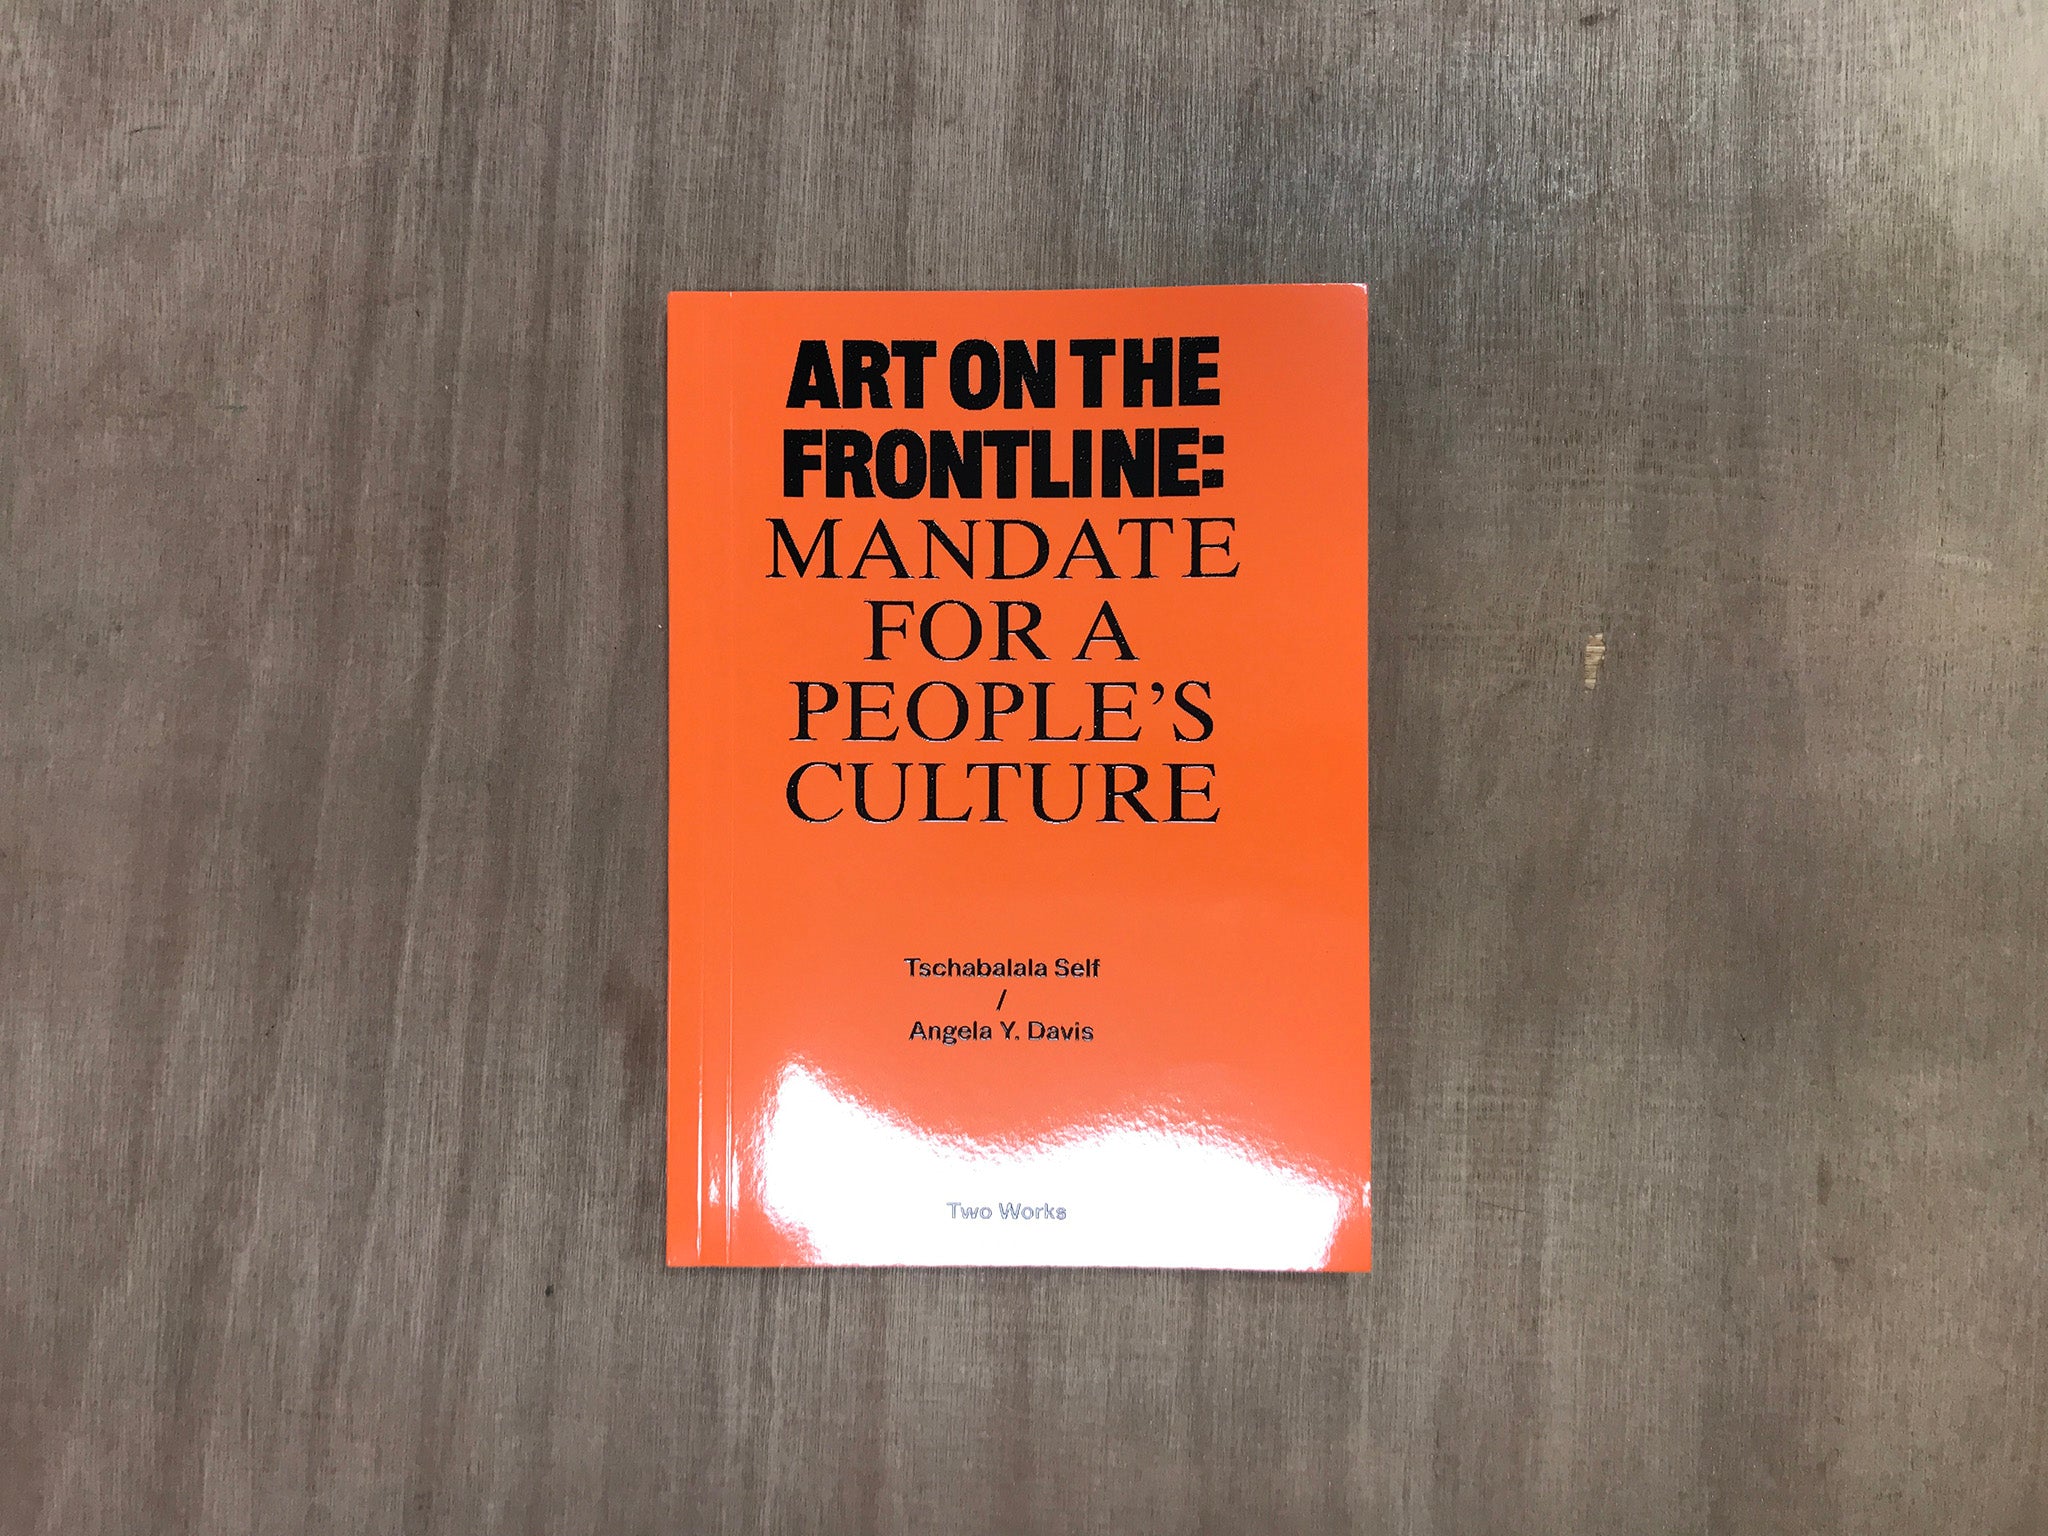 ART ON THE FRONTLINE: MANDATE FOR A PEOPLE'S CULTURE by Tschabalala Self and Angela Y. Davis